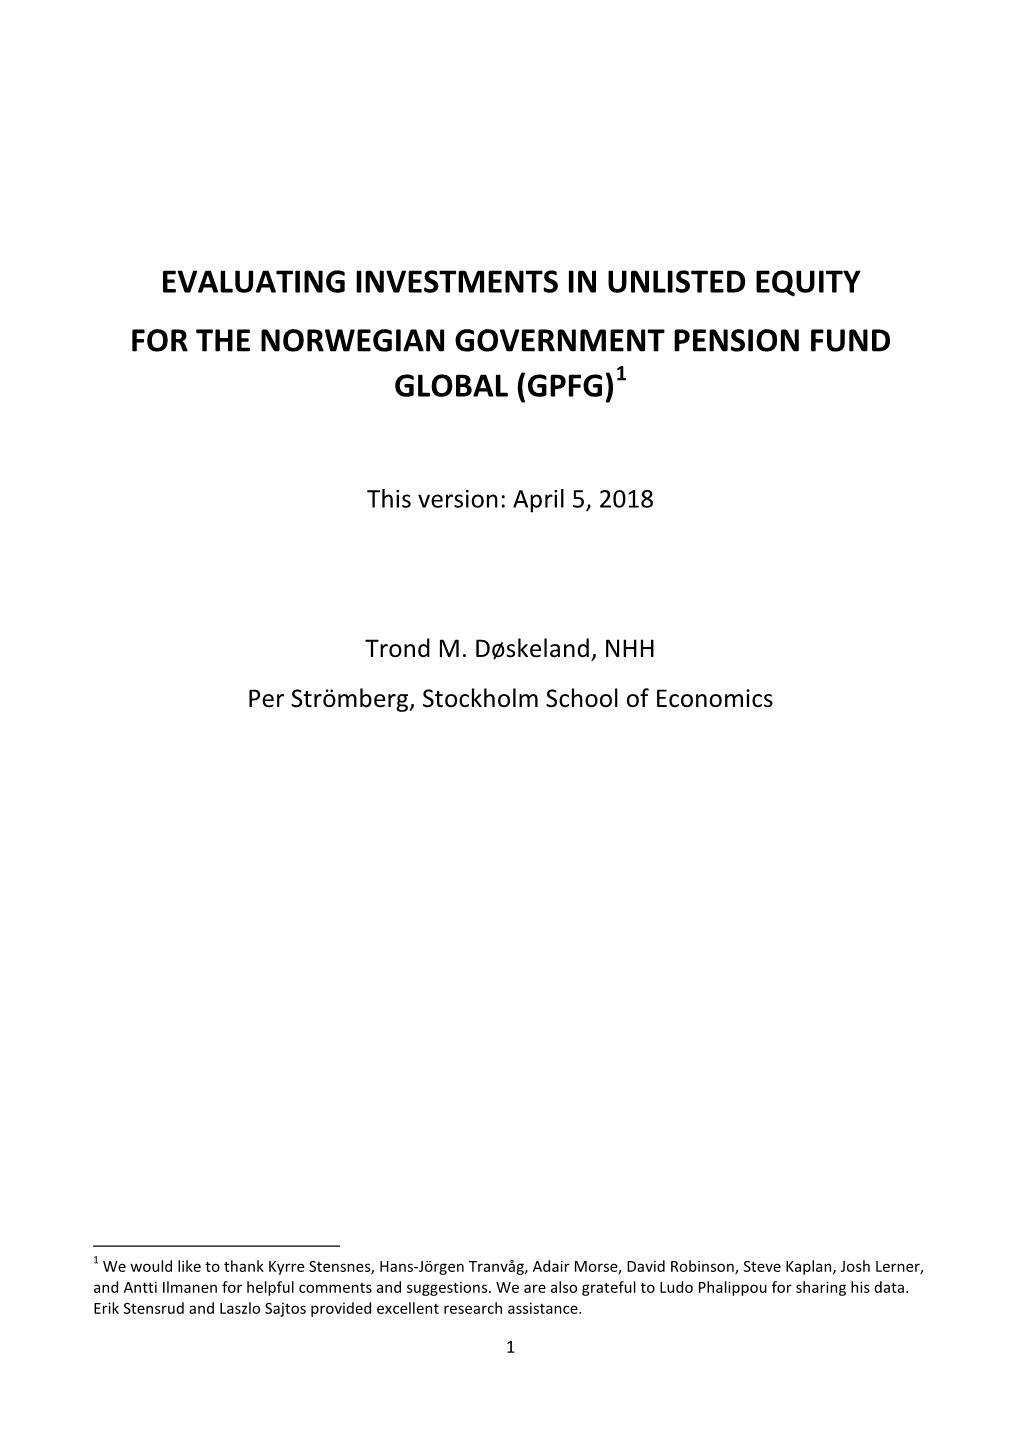 Evaluating Investments in Unlisted Equity